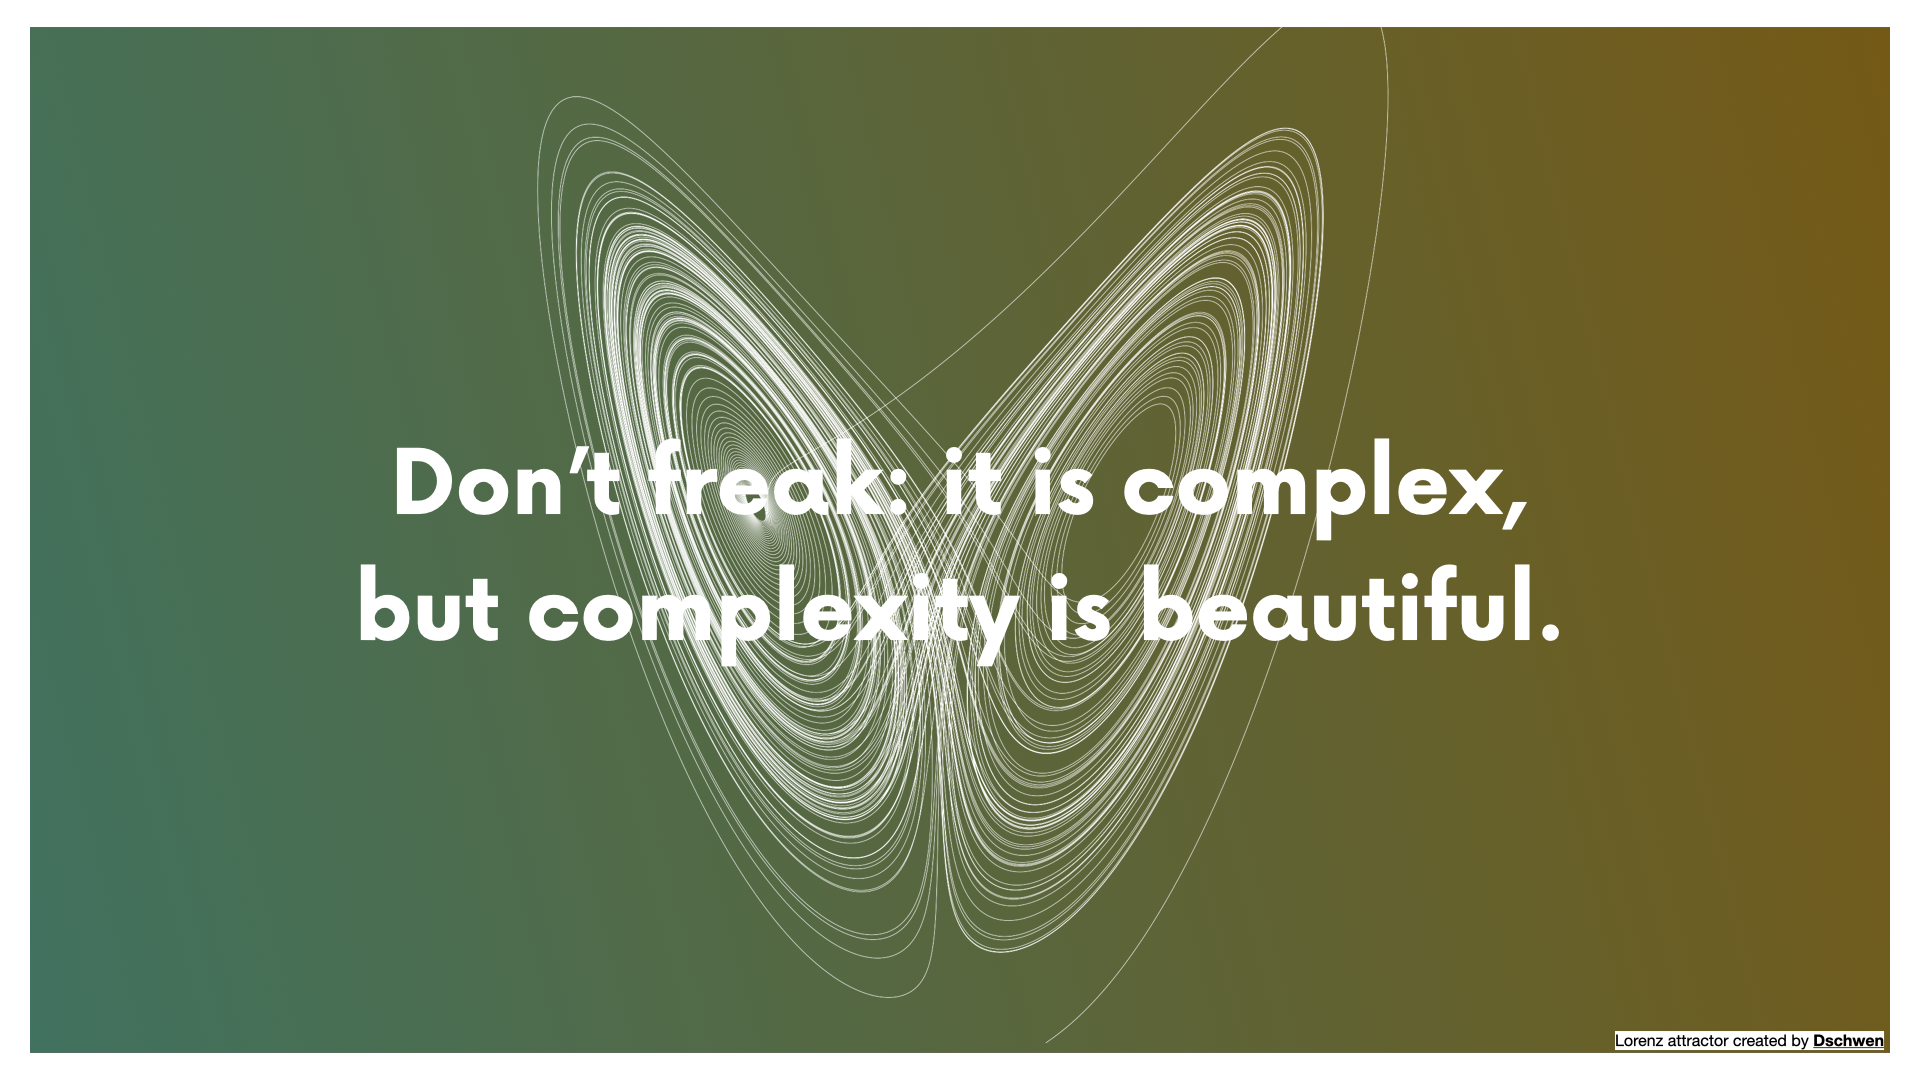 Don't freak"it is complex, but complex is beautiful.